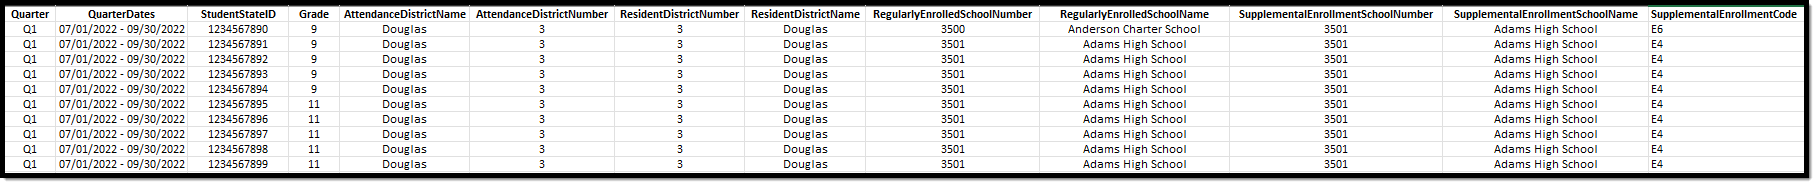 Image of the Non-Traditional Supplemental Student Attendance Report in CSV format.